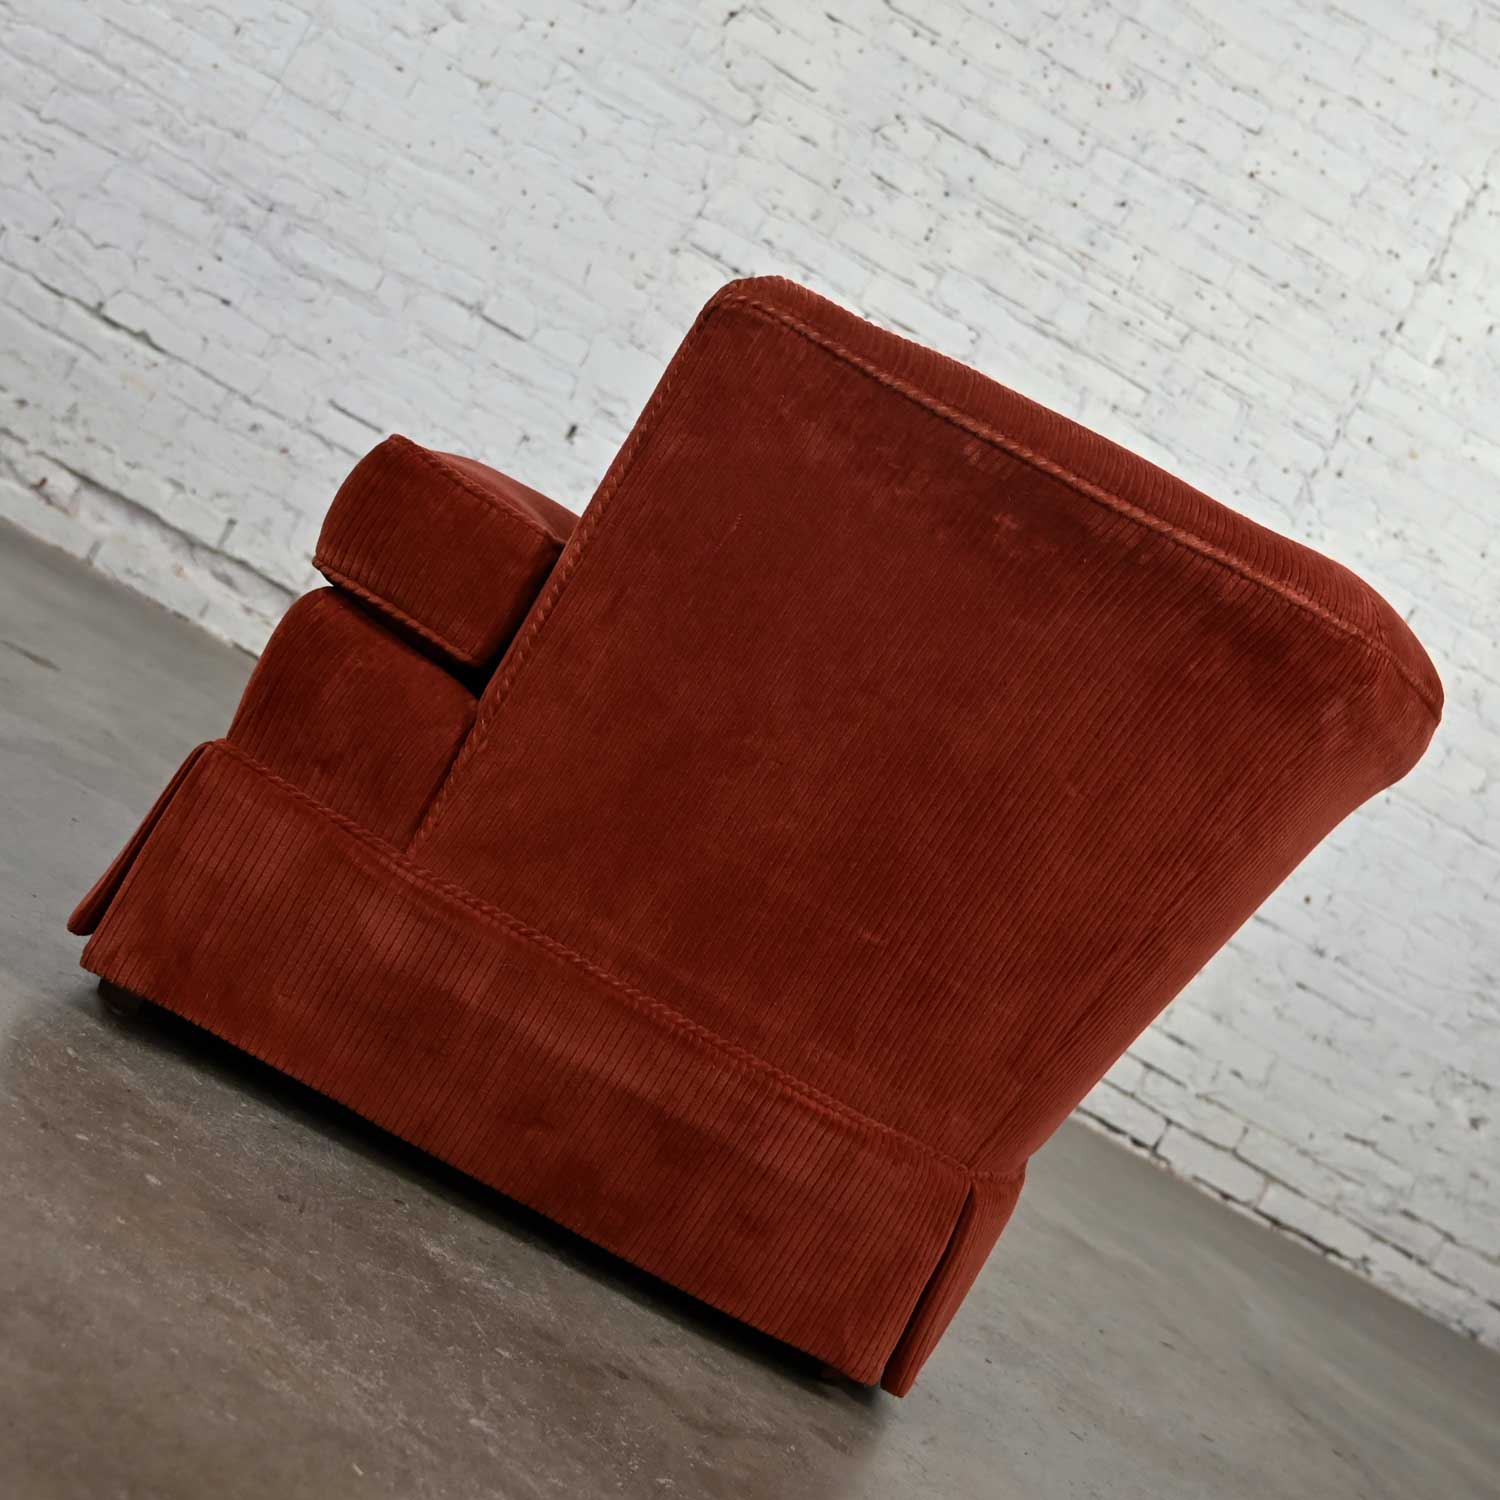 Burnt Orange Wide Wale Brushed Corduroy Tub Barrel Chair by Schuford Furniture for Century Furniture